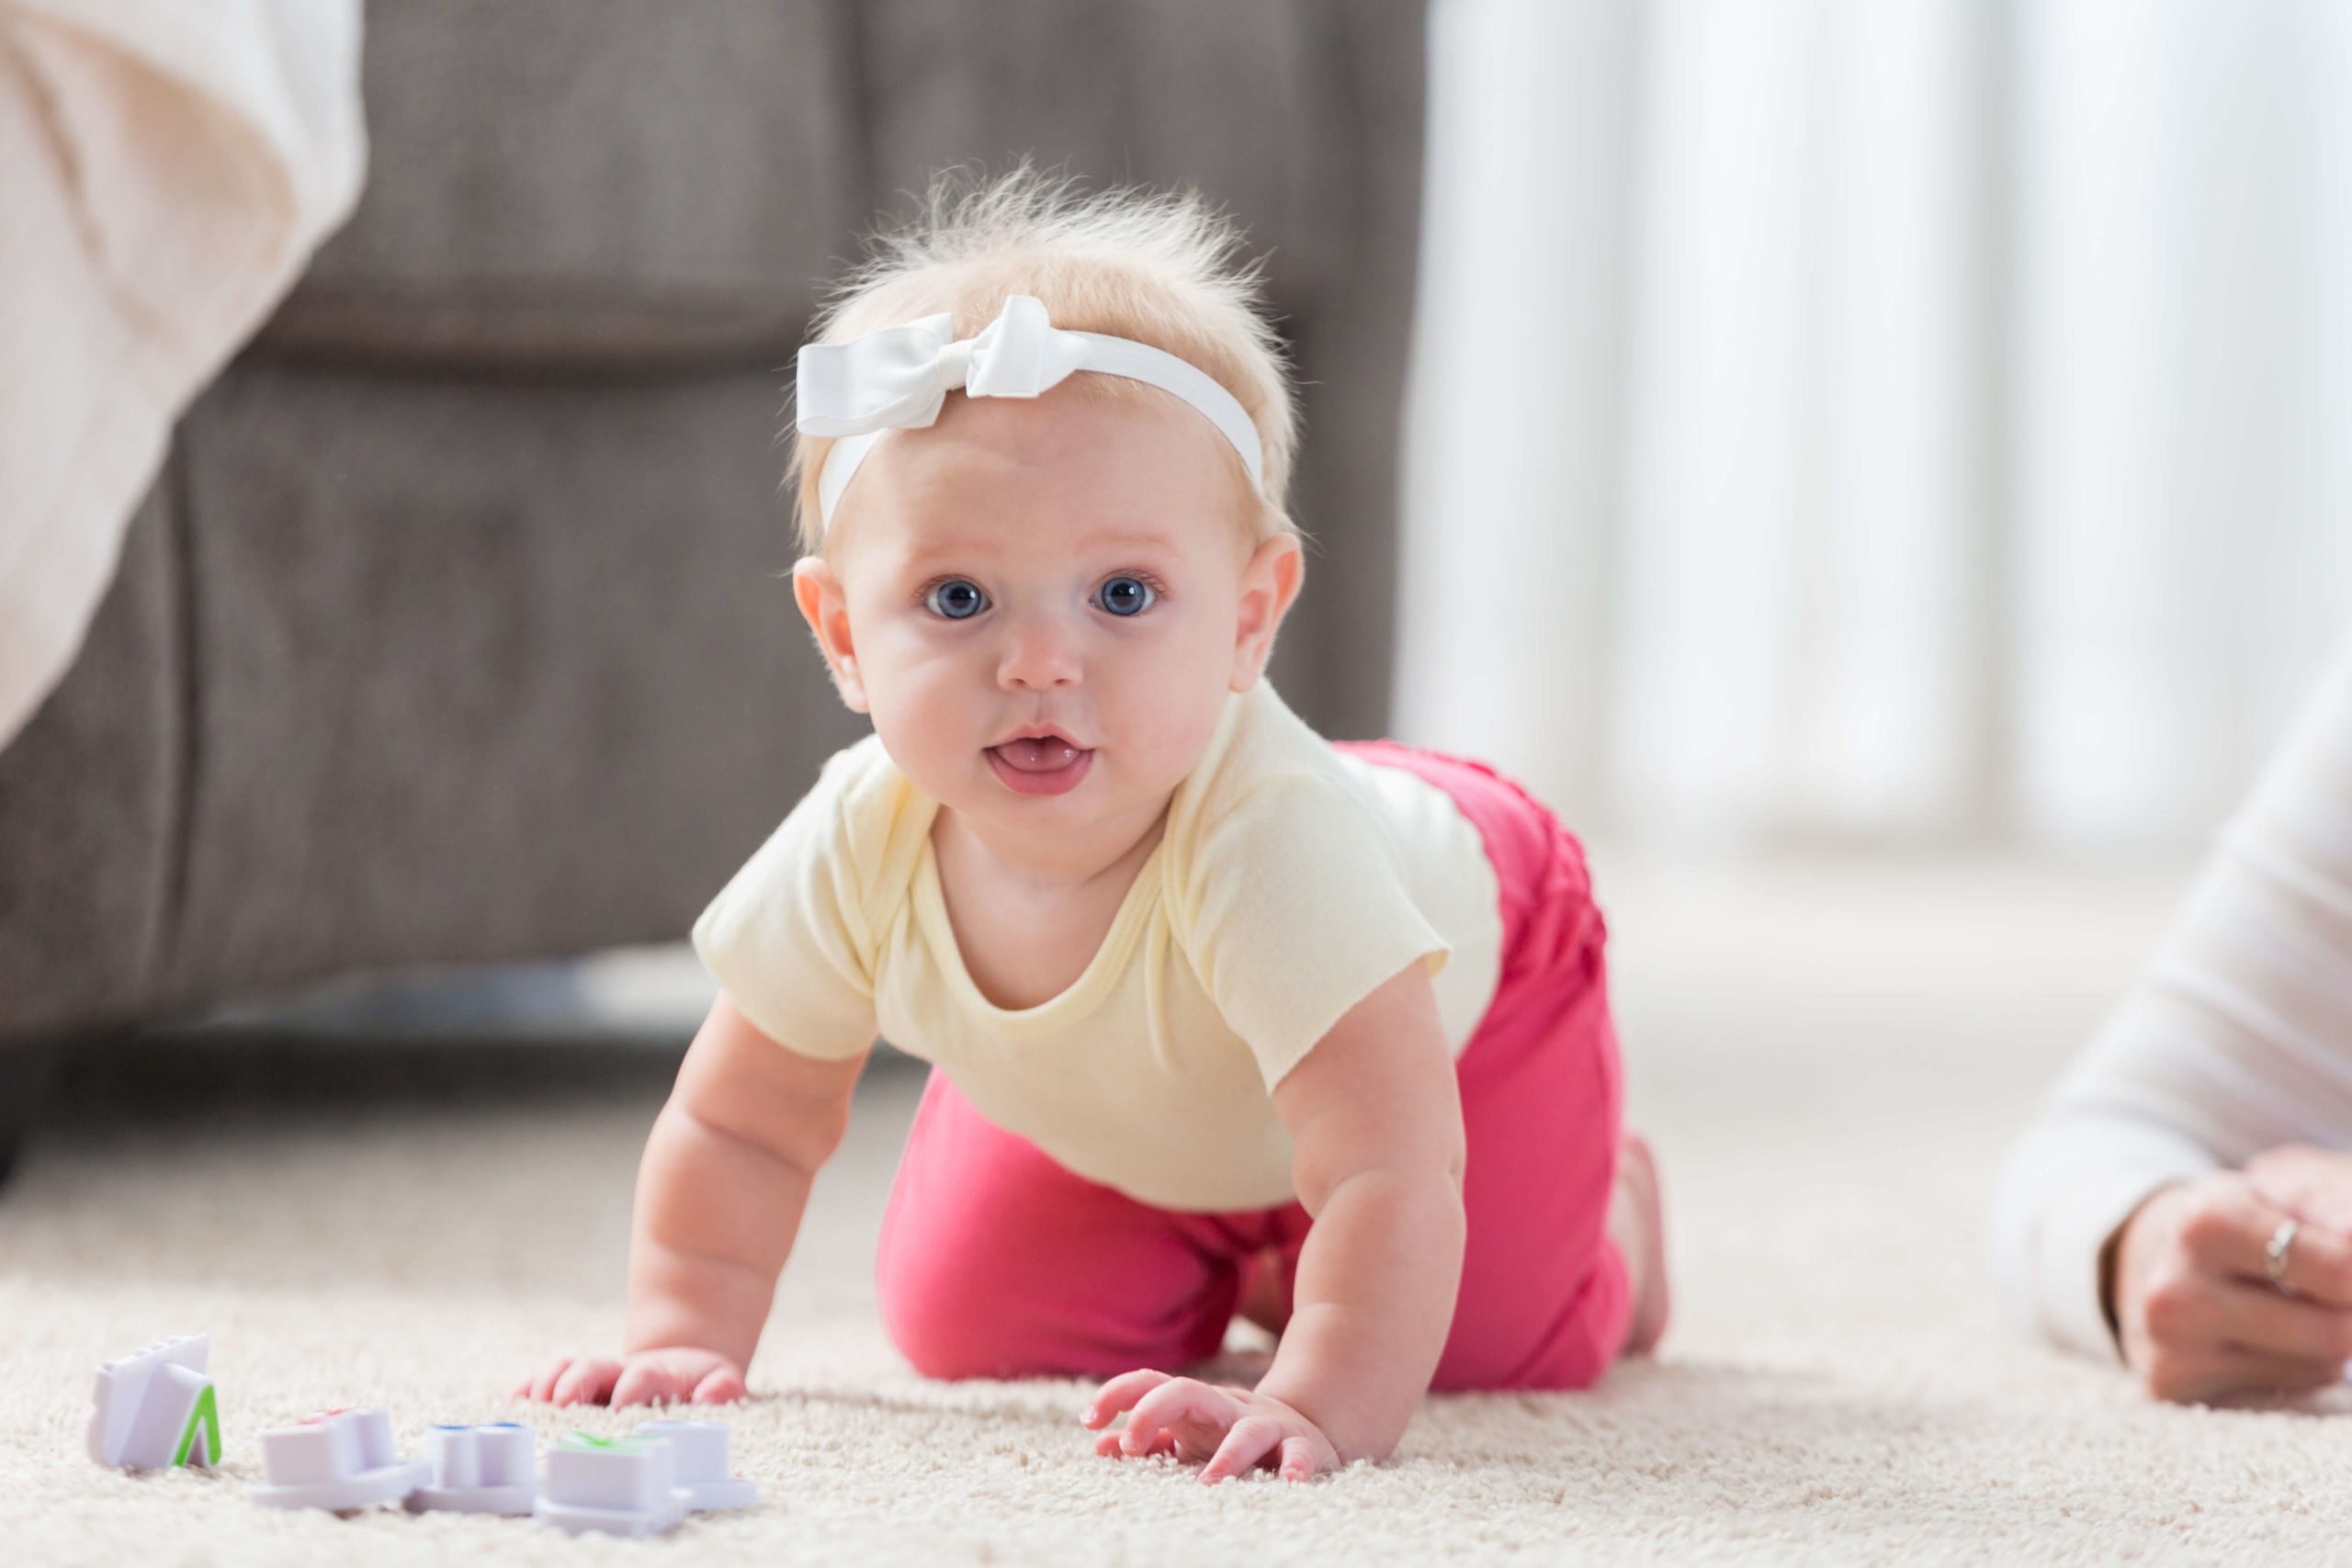 What are the motor skills of crawling?